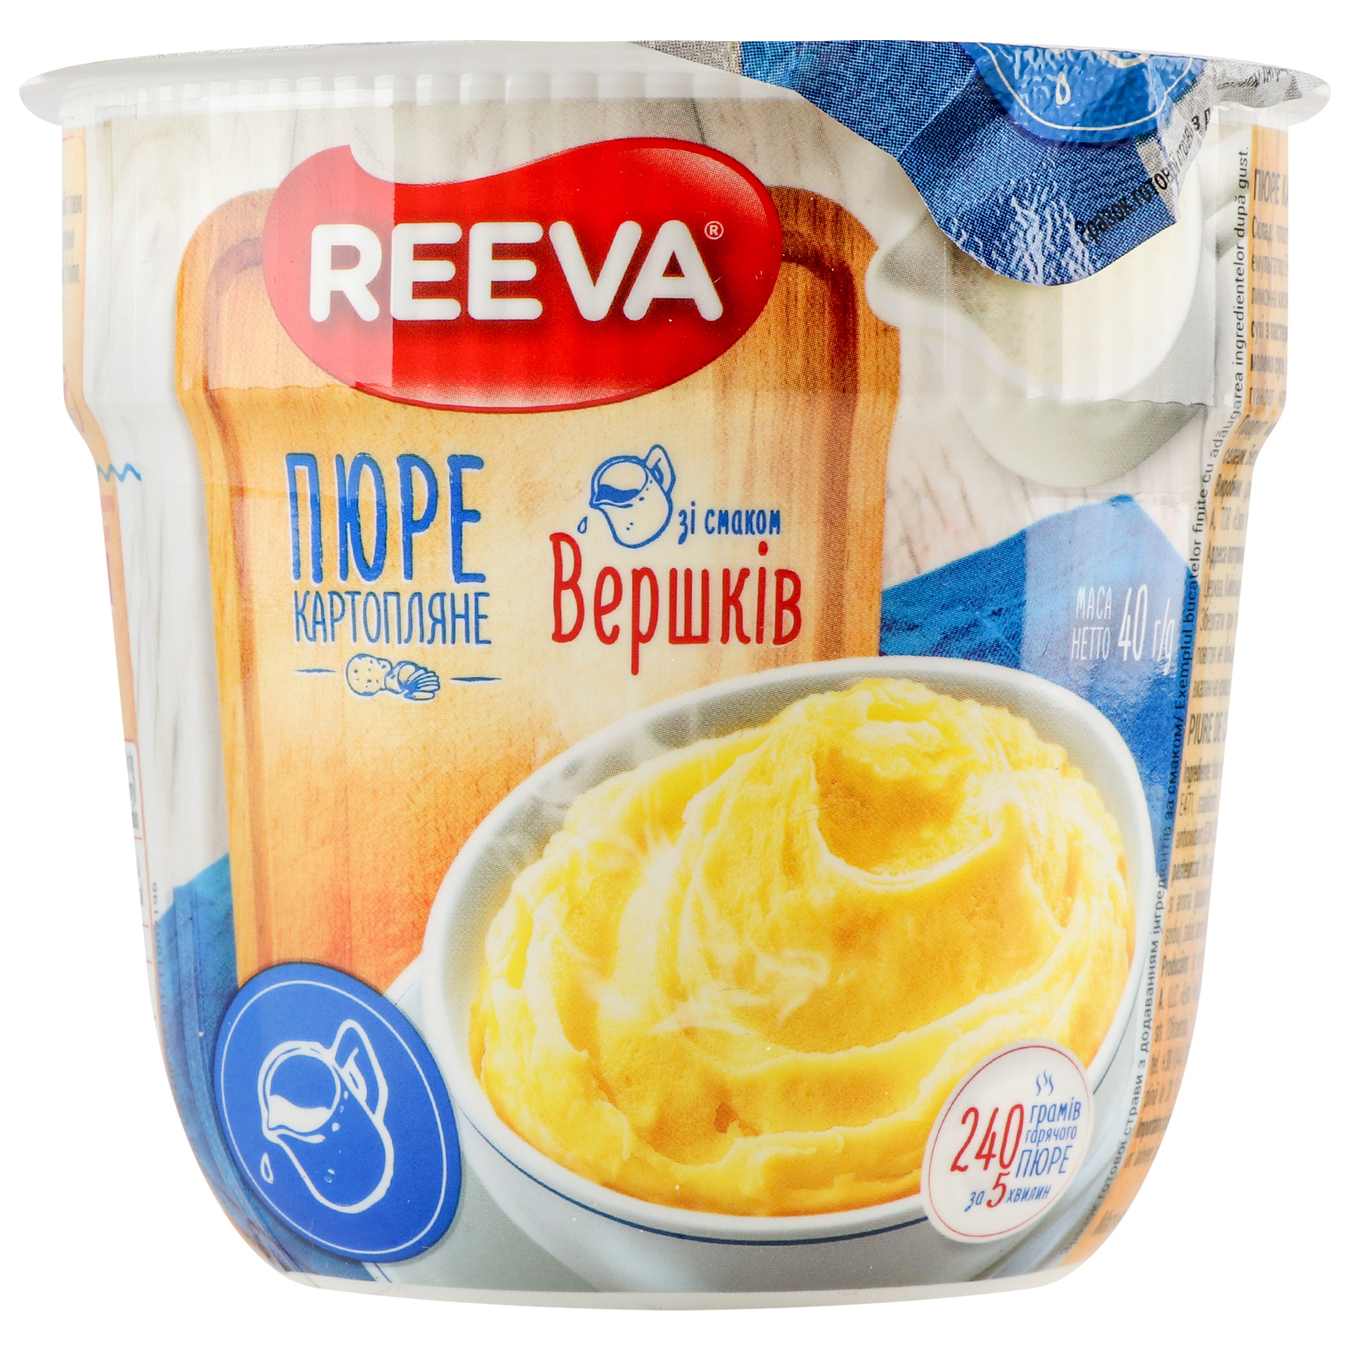 Reeva mashed potatoes with a taste of cream glass 40g 4